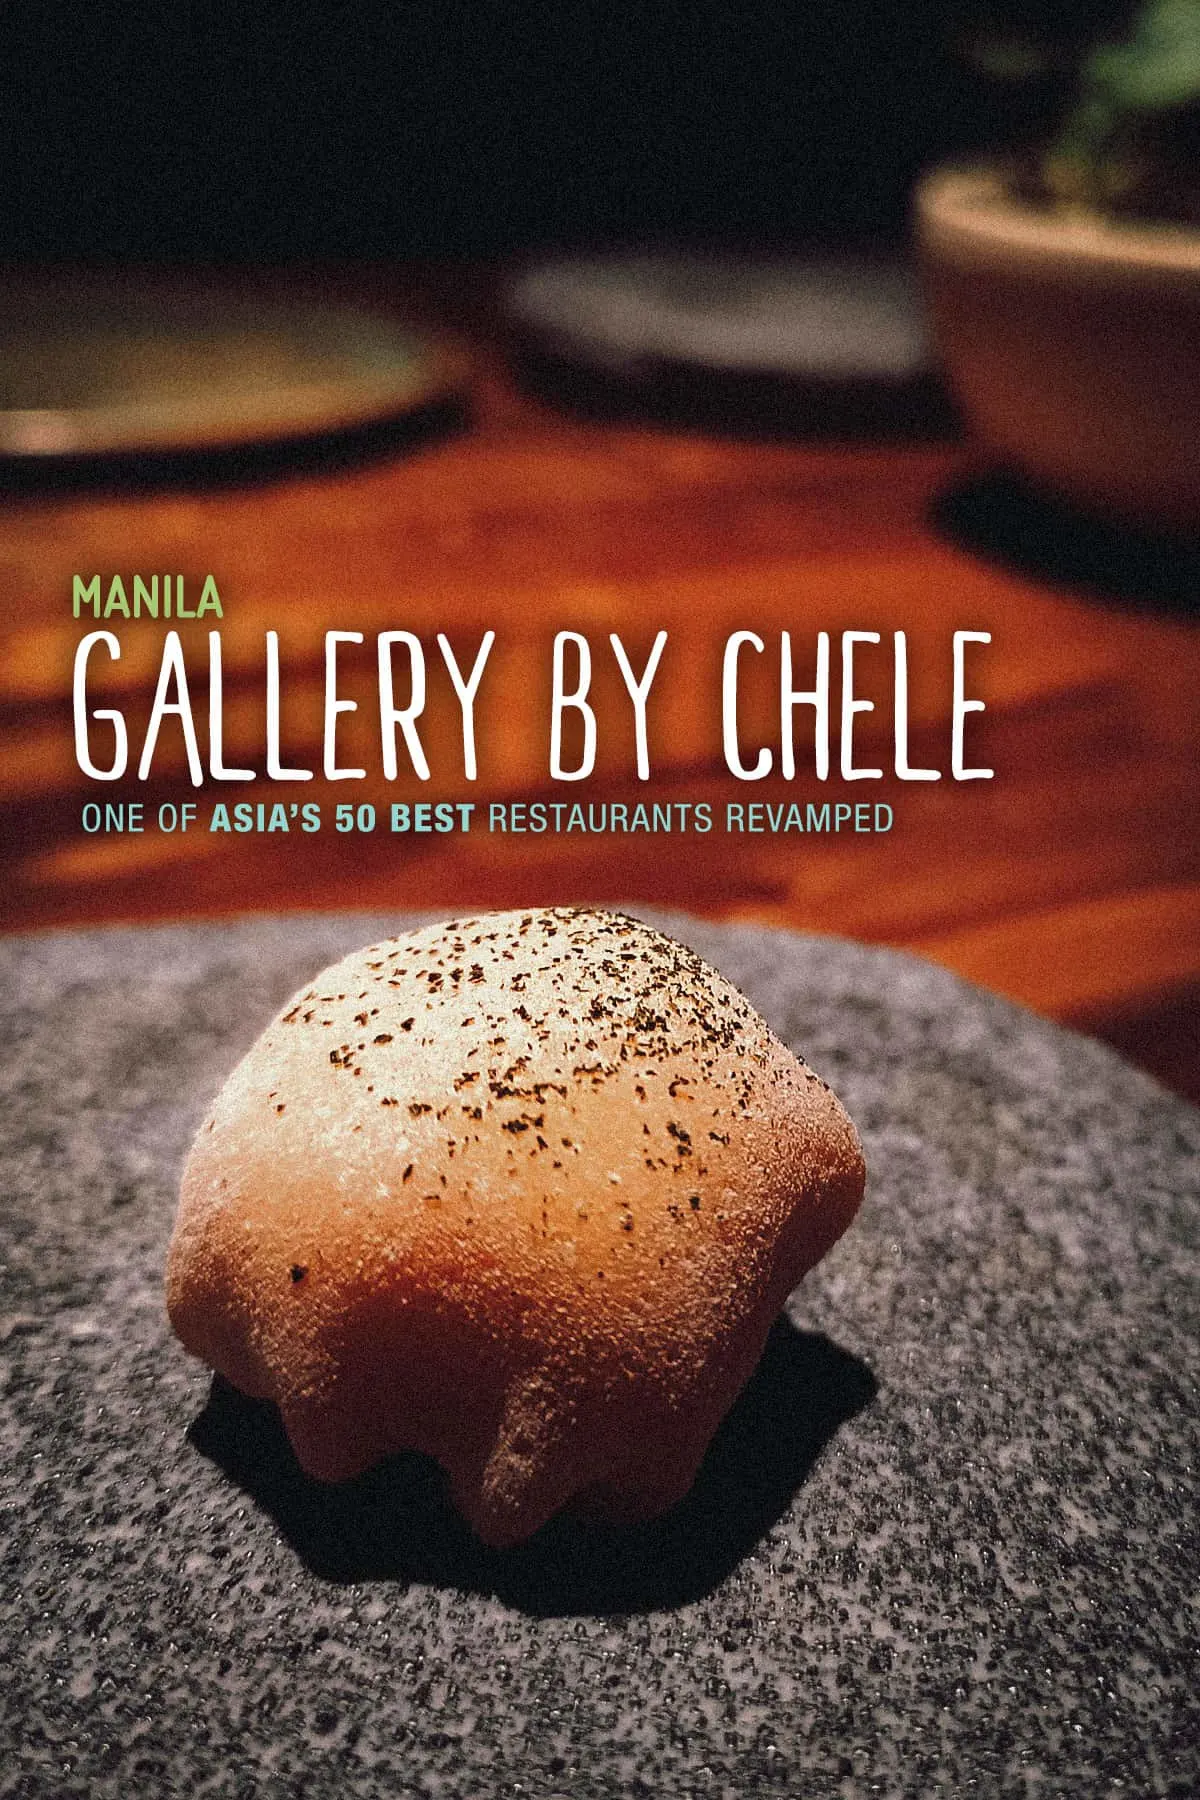 Gallery by Chele, Manila, Philippines